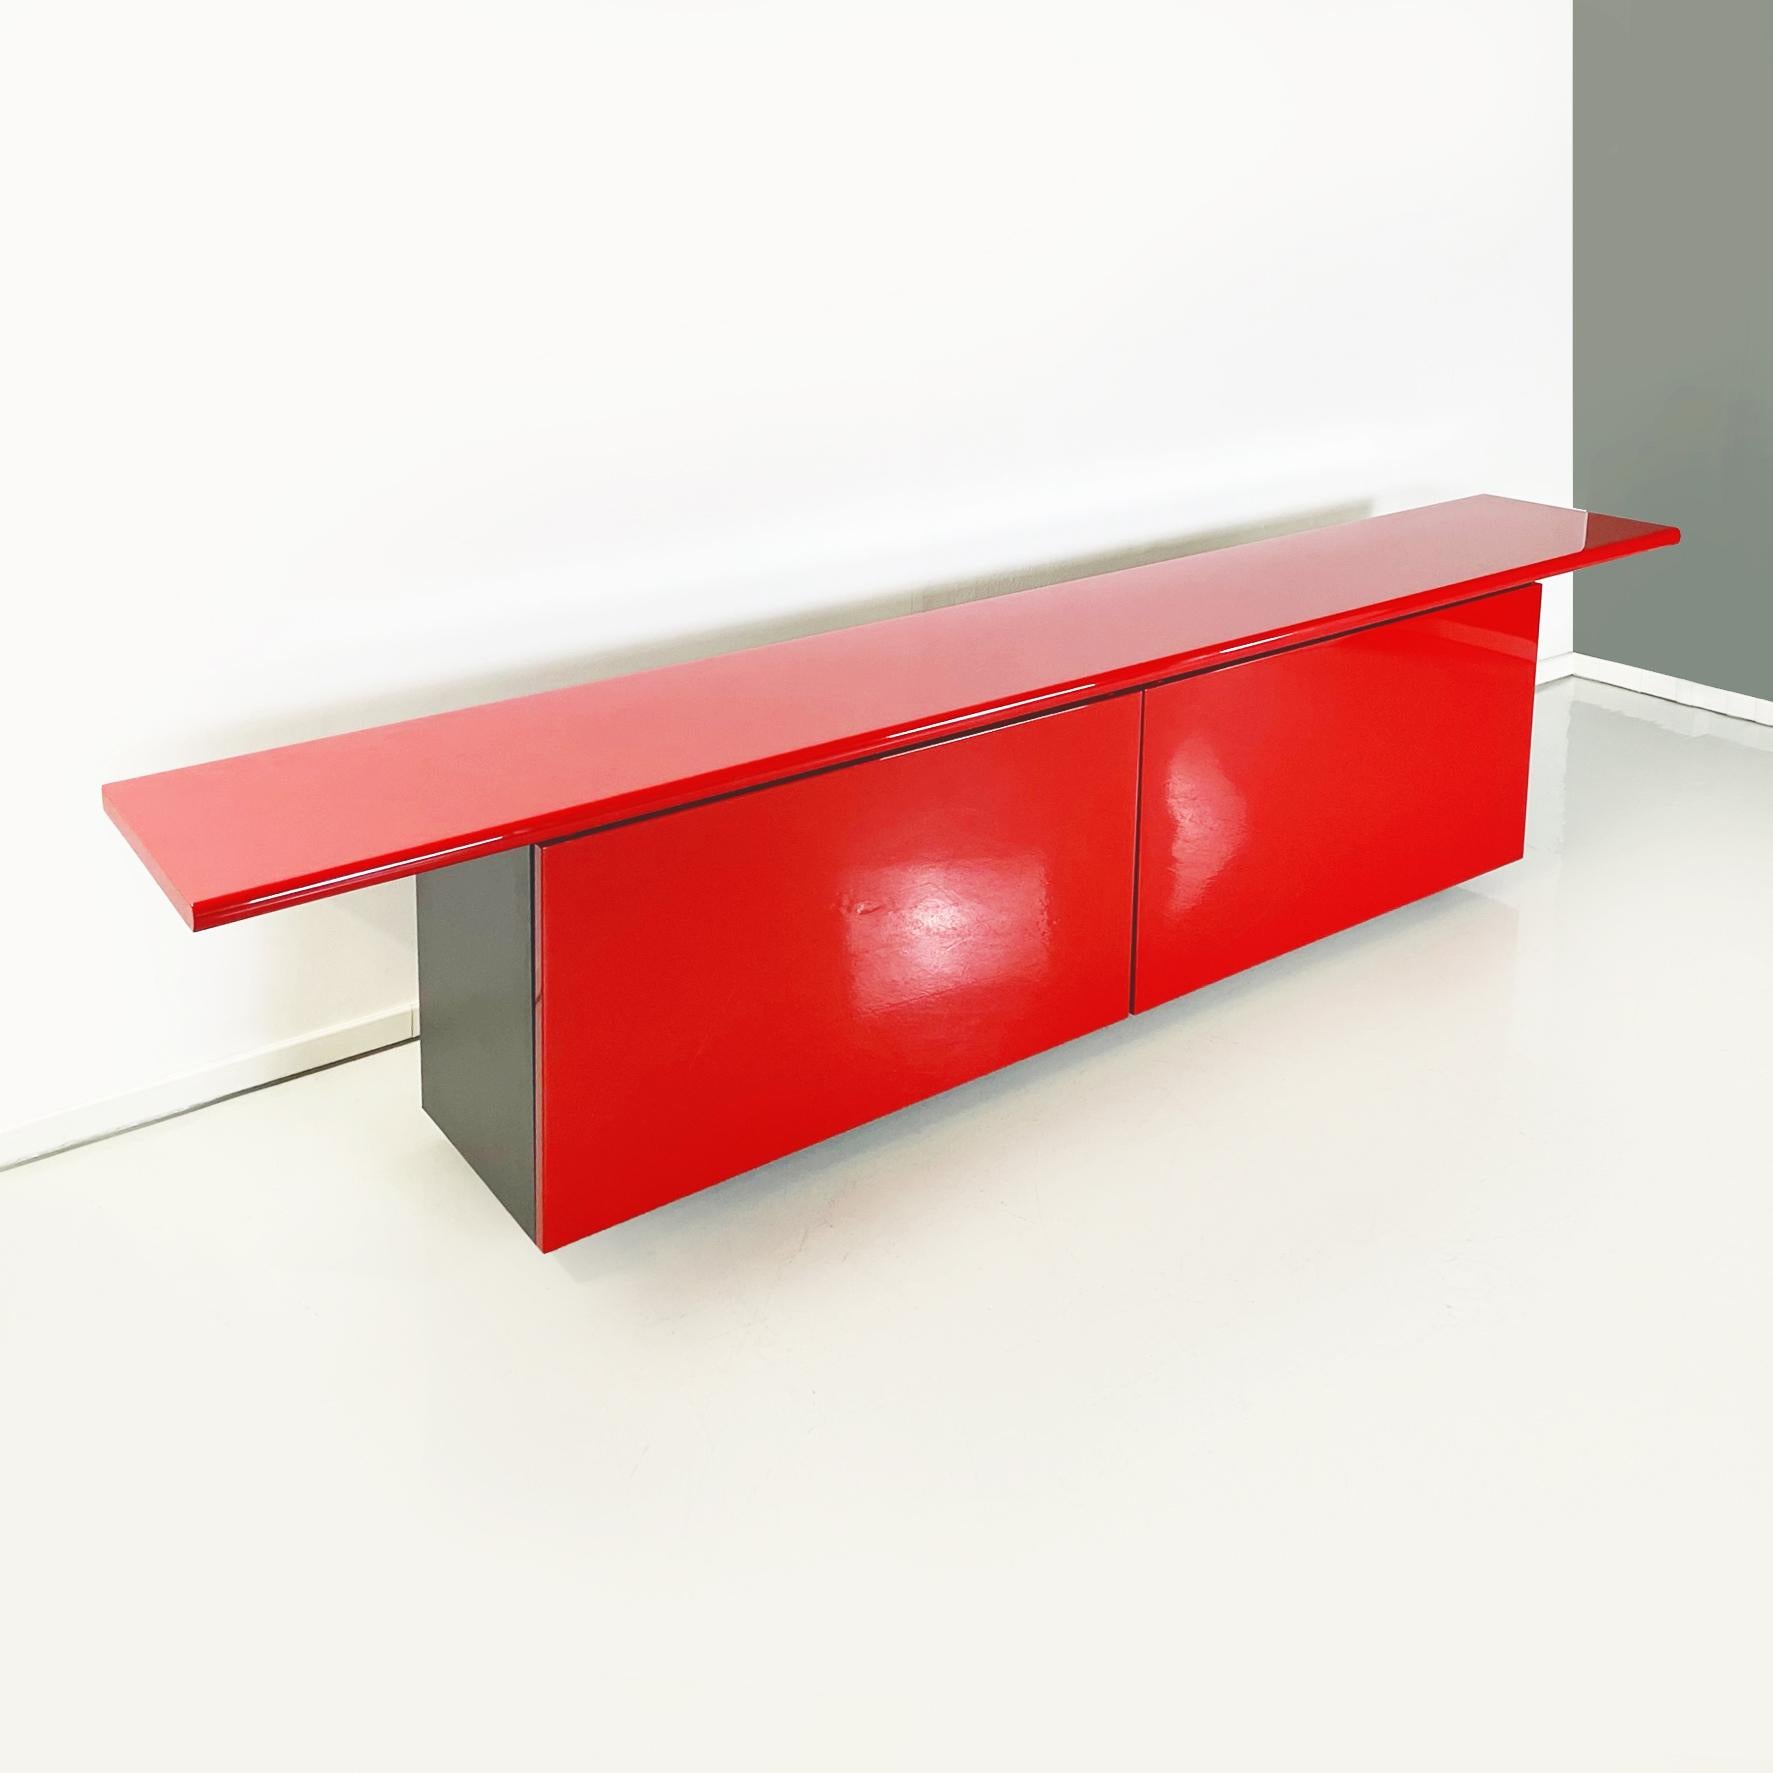 Italian modern Red Sideboard Sheraton by Giotto Stoppino and Lodovico Acerbis for Acerbis, 1977
Sideboard mod. Sheraton in glossy lacquered wood in bright red and black. The rectangular top has a bevelled front edge. On the front it has 4 black